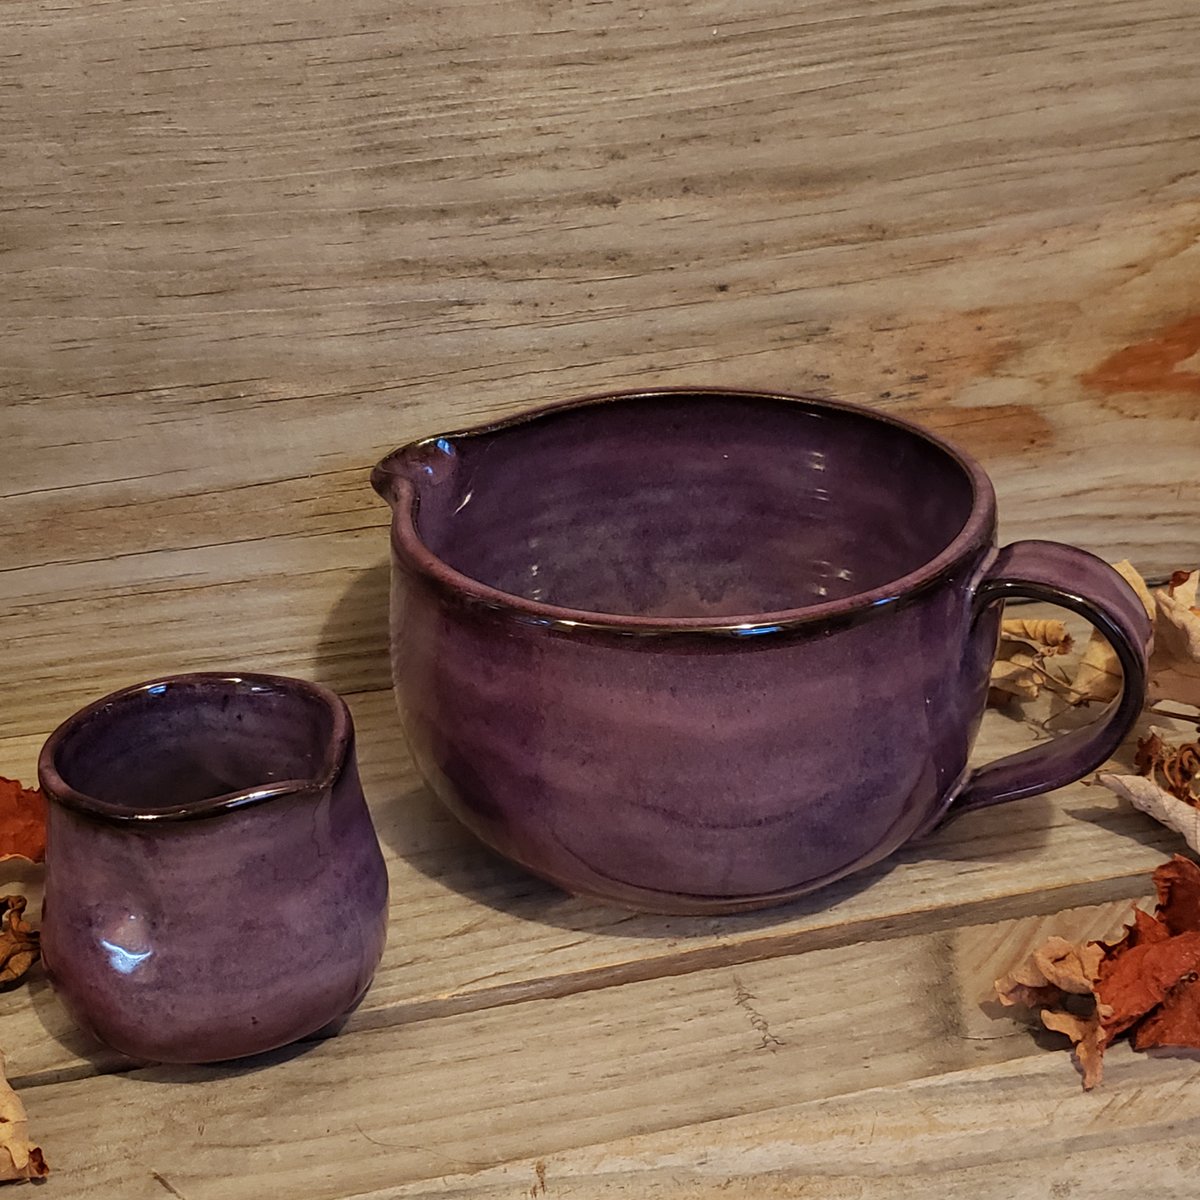 Image of Countertop-worthy Batter Bowl 4 cup with Chirpy Bird Pitcher: Huckleberry (Purple)